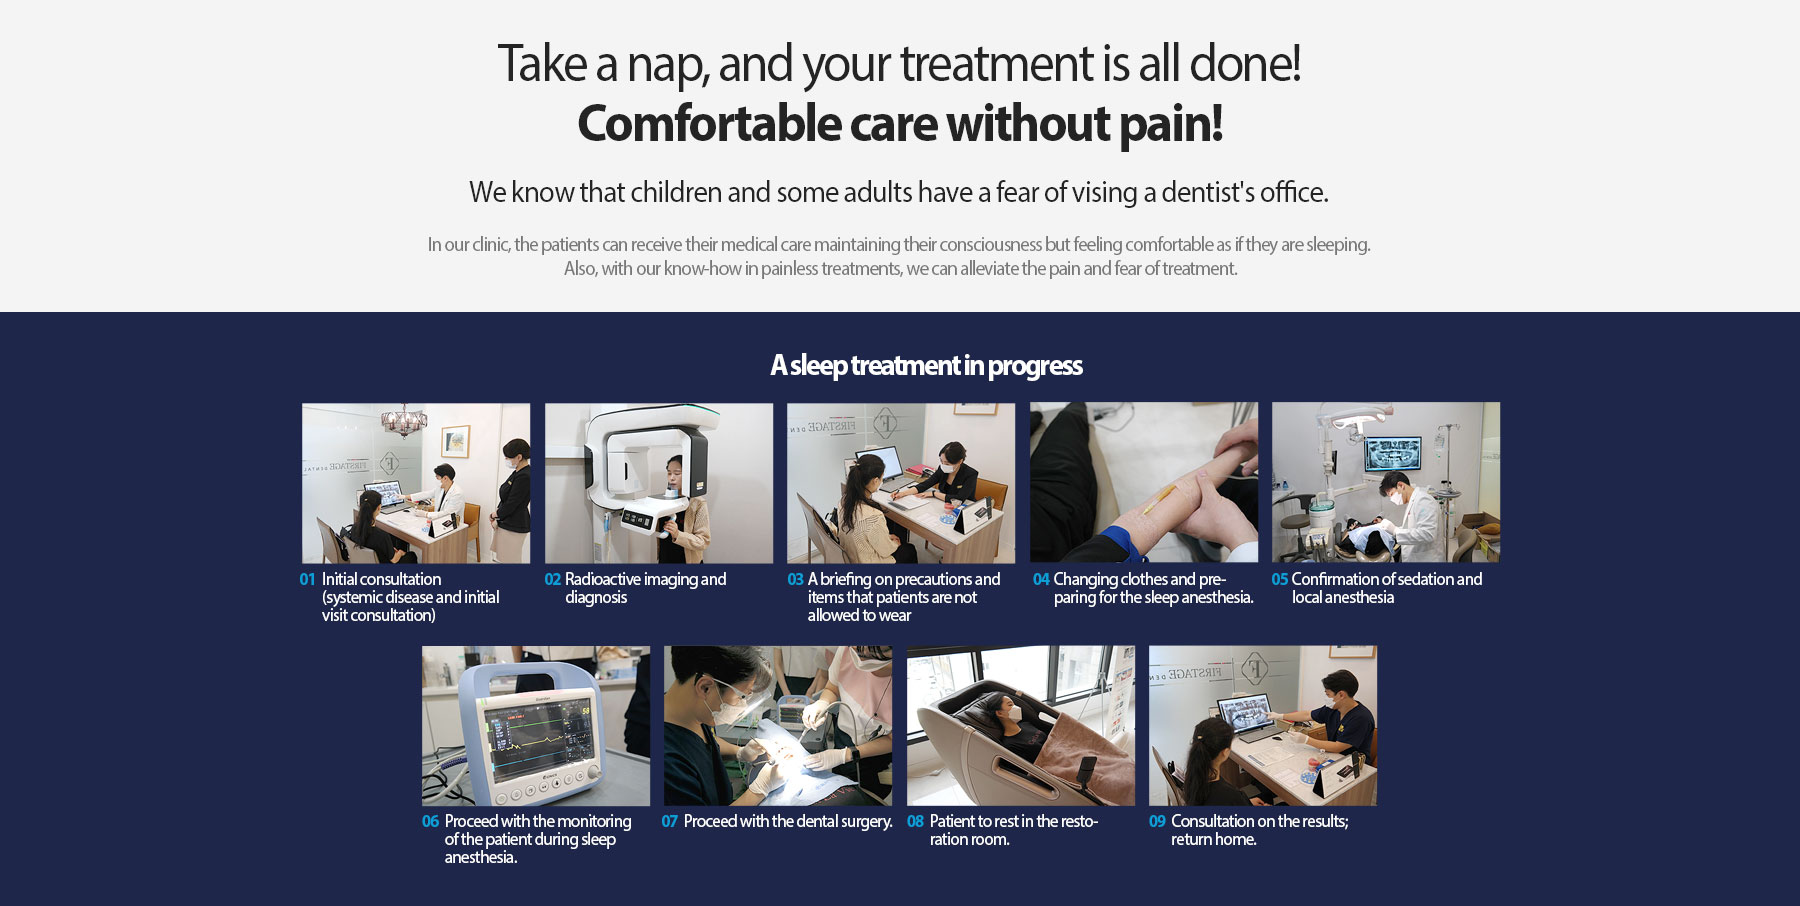 Take a nap, and your treatment is all done! Comfortable care without pain!